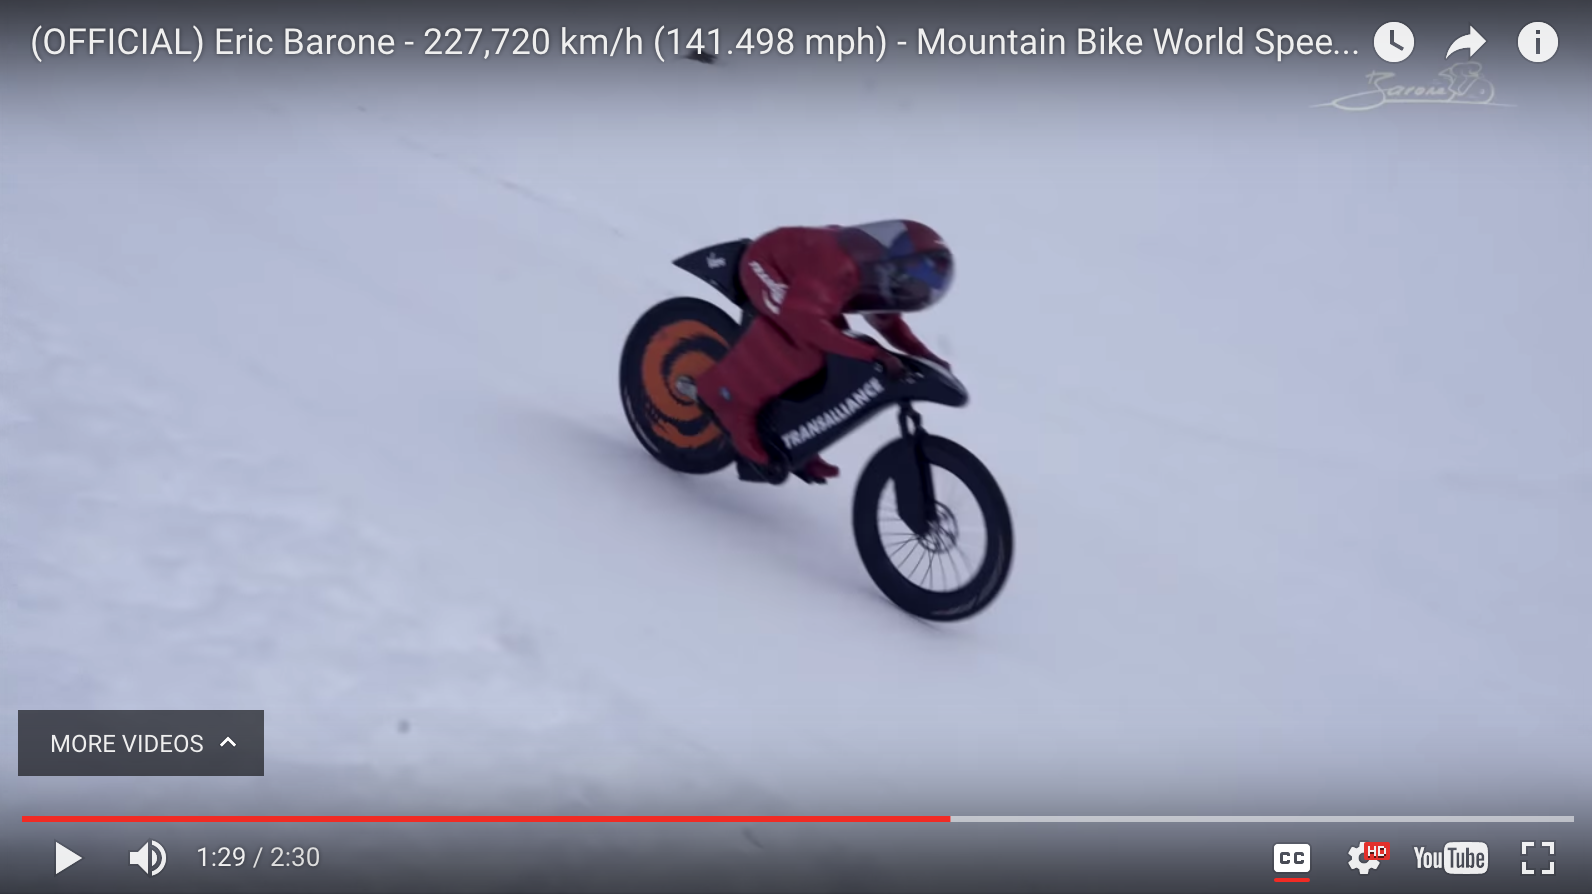 Video: Eric Barone Sets New Mountain Bike Speed Record at 141 mph